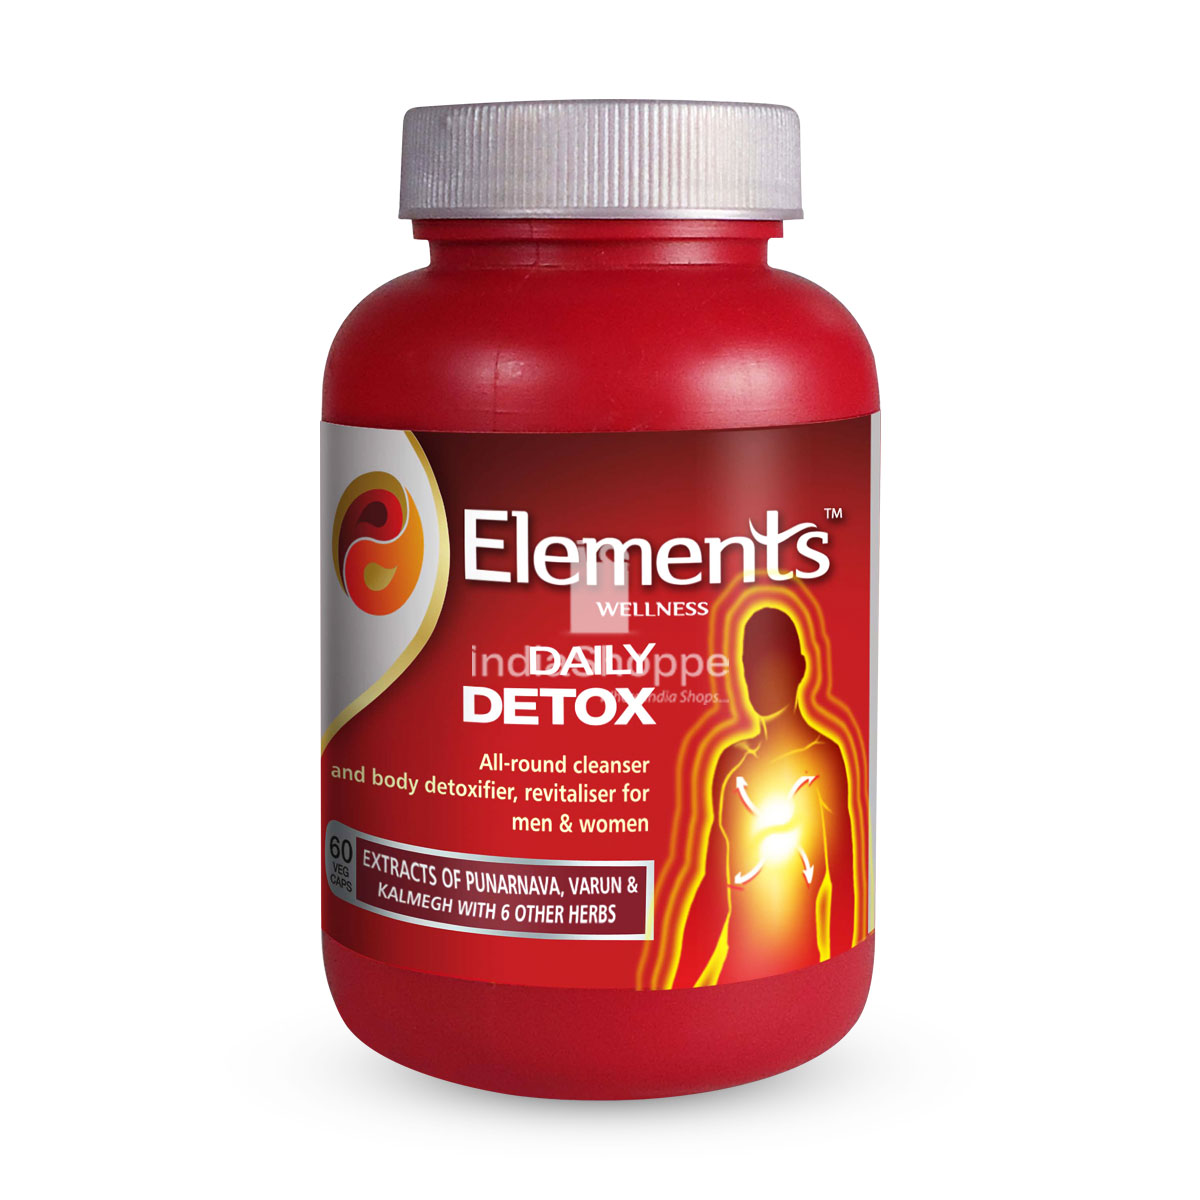 Buy Elements Daily Detox at Best Price Online